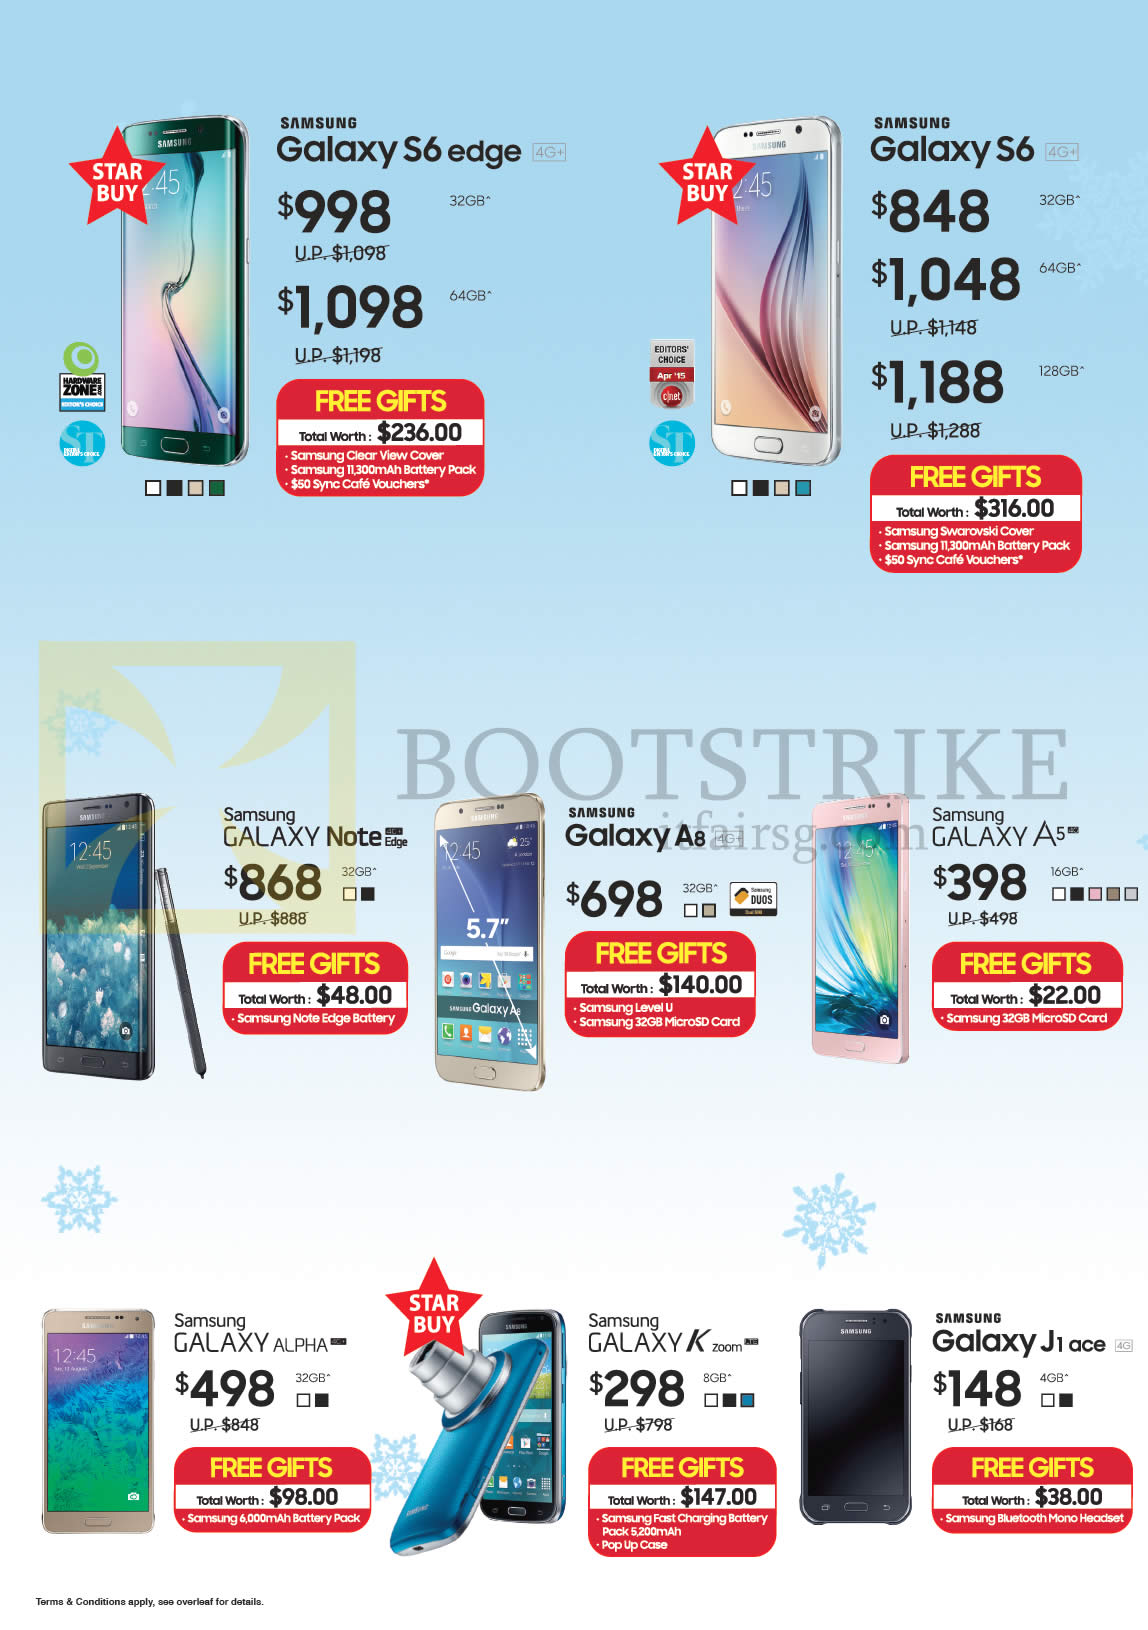 SITEX 2015 price list image brochure of Samsung Mobile SmartPhones Galaxy S6 Edge, S6, Note Edge, A8, A5, Alpha, K Zoom, J1 Ace